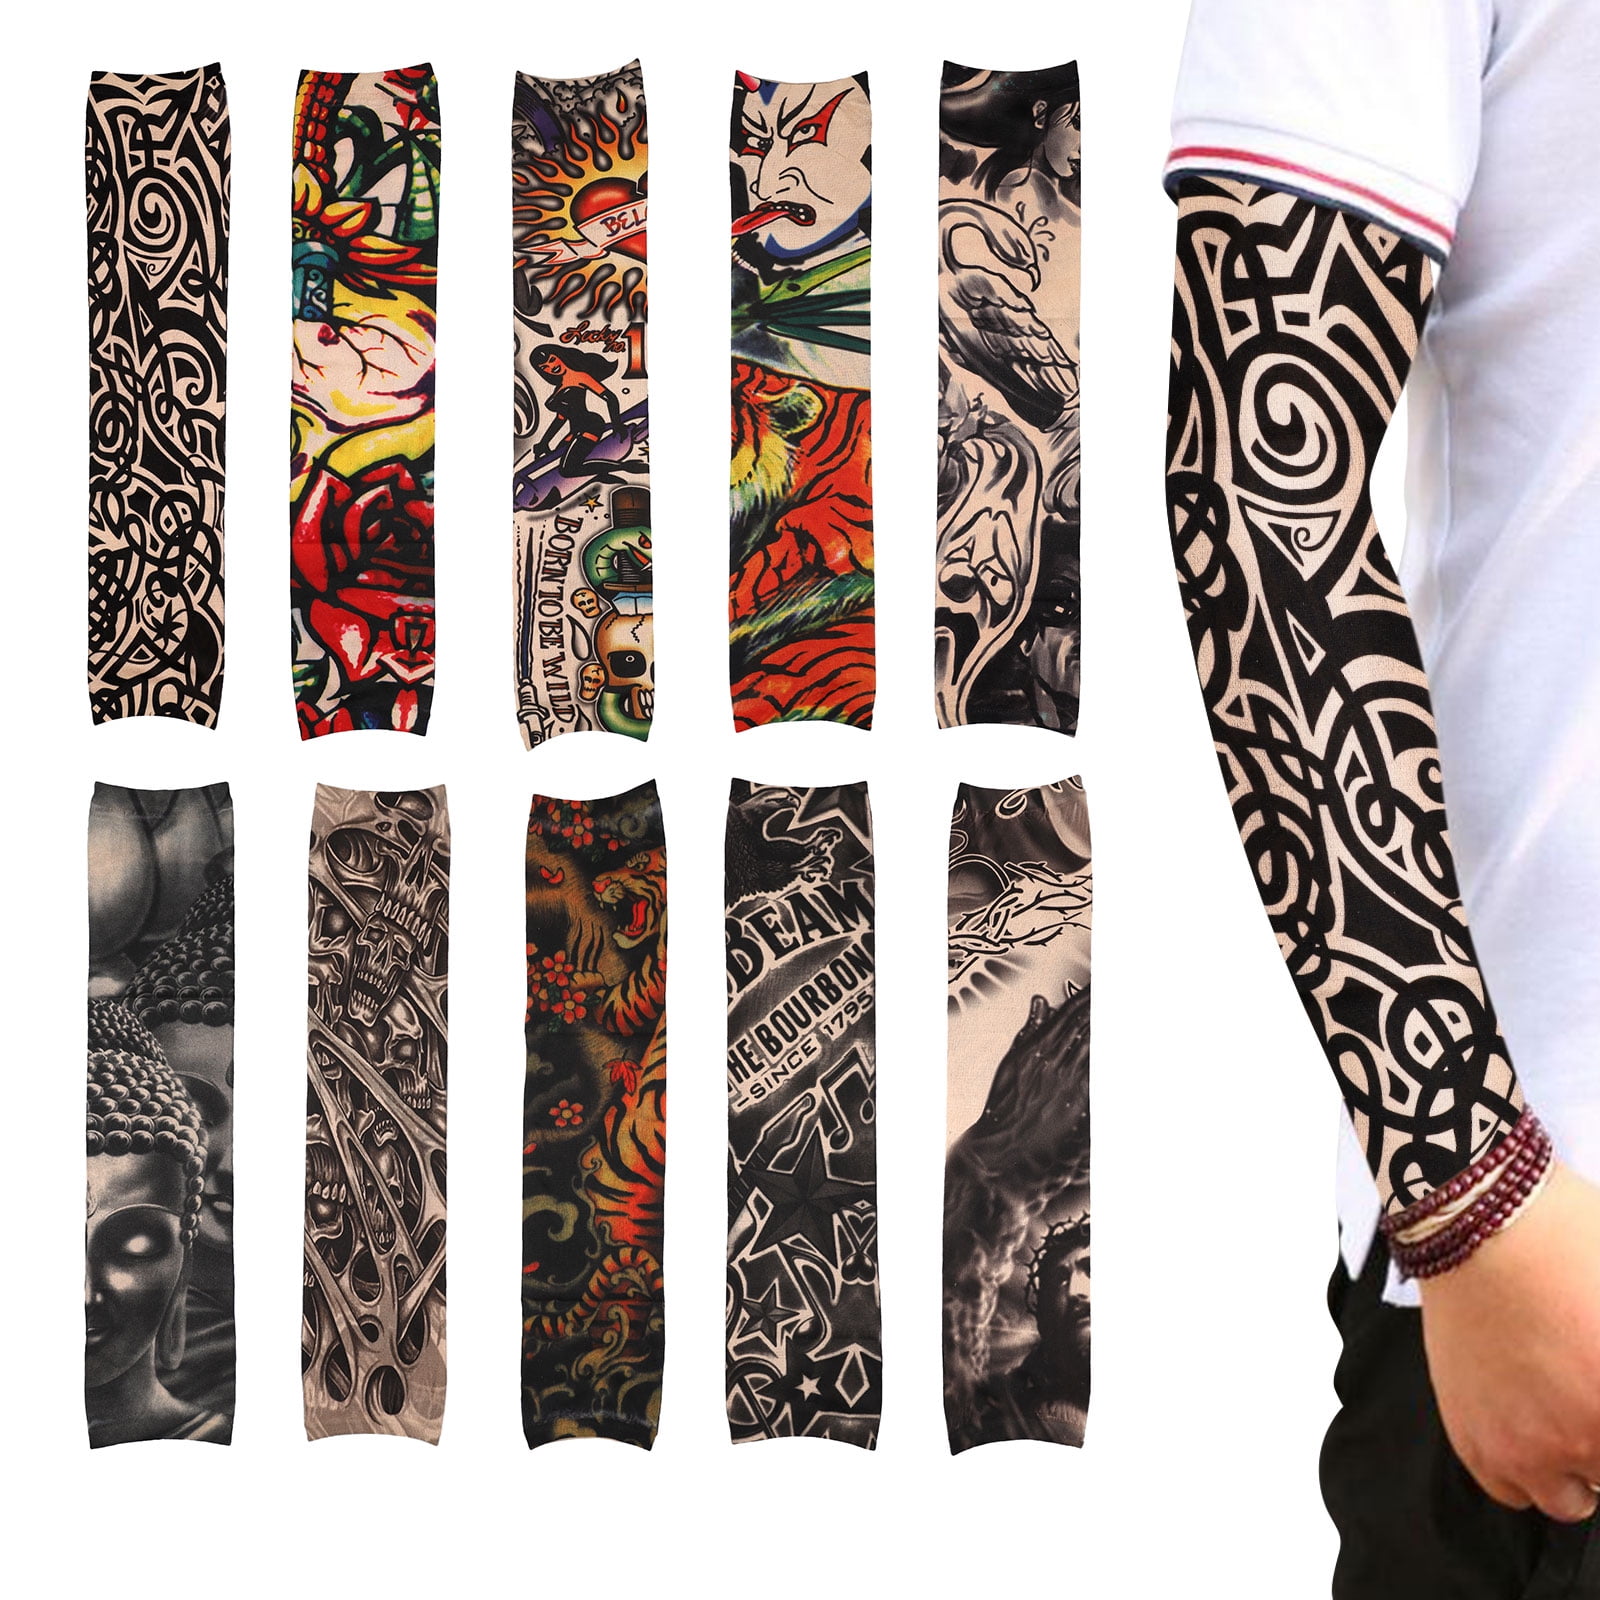 Voghtic 10pcs Set Fake Temporary Arm Tattoo Sunscreen Sleeves Colorful Arts Stockings 